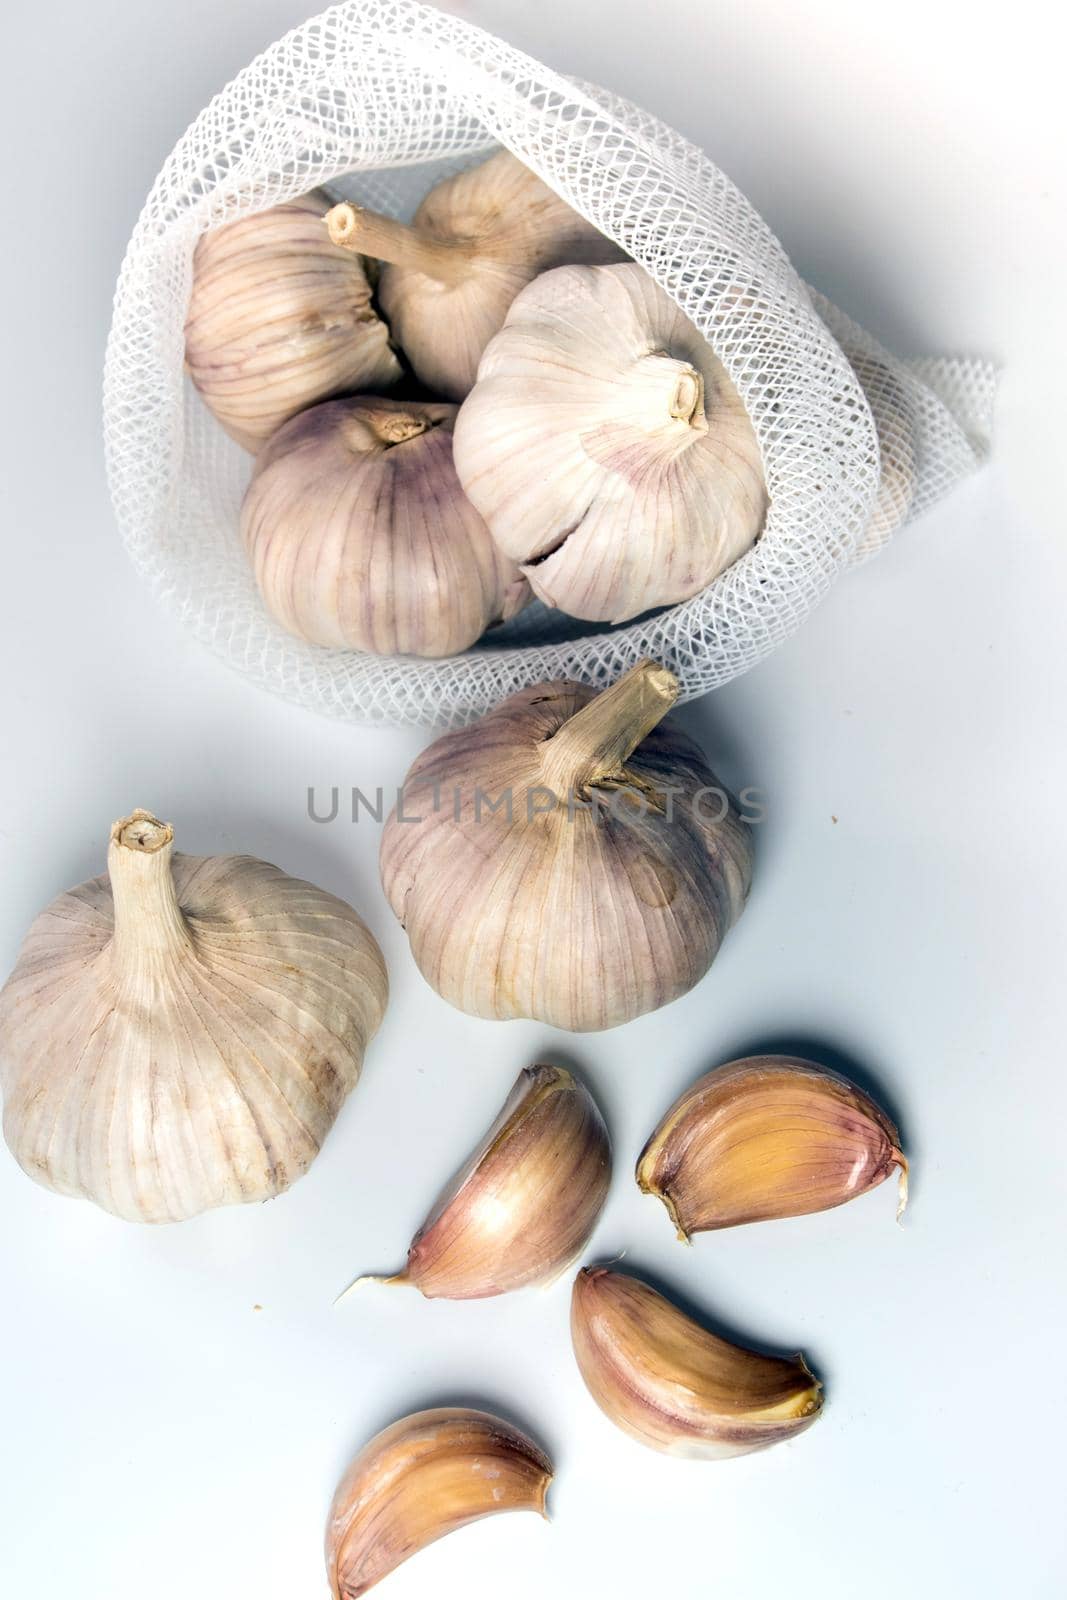 Garlics on white background, spice herb and food ingredient